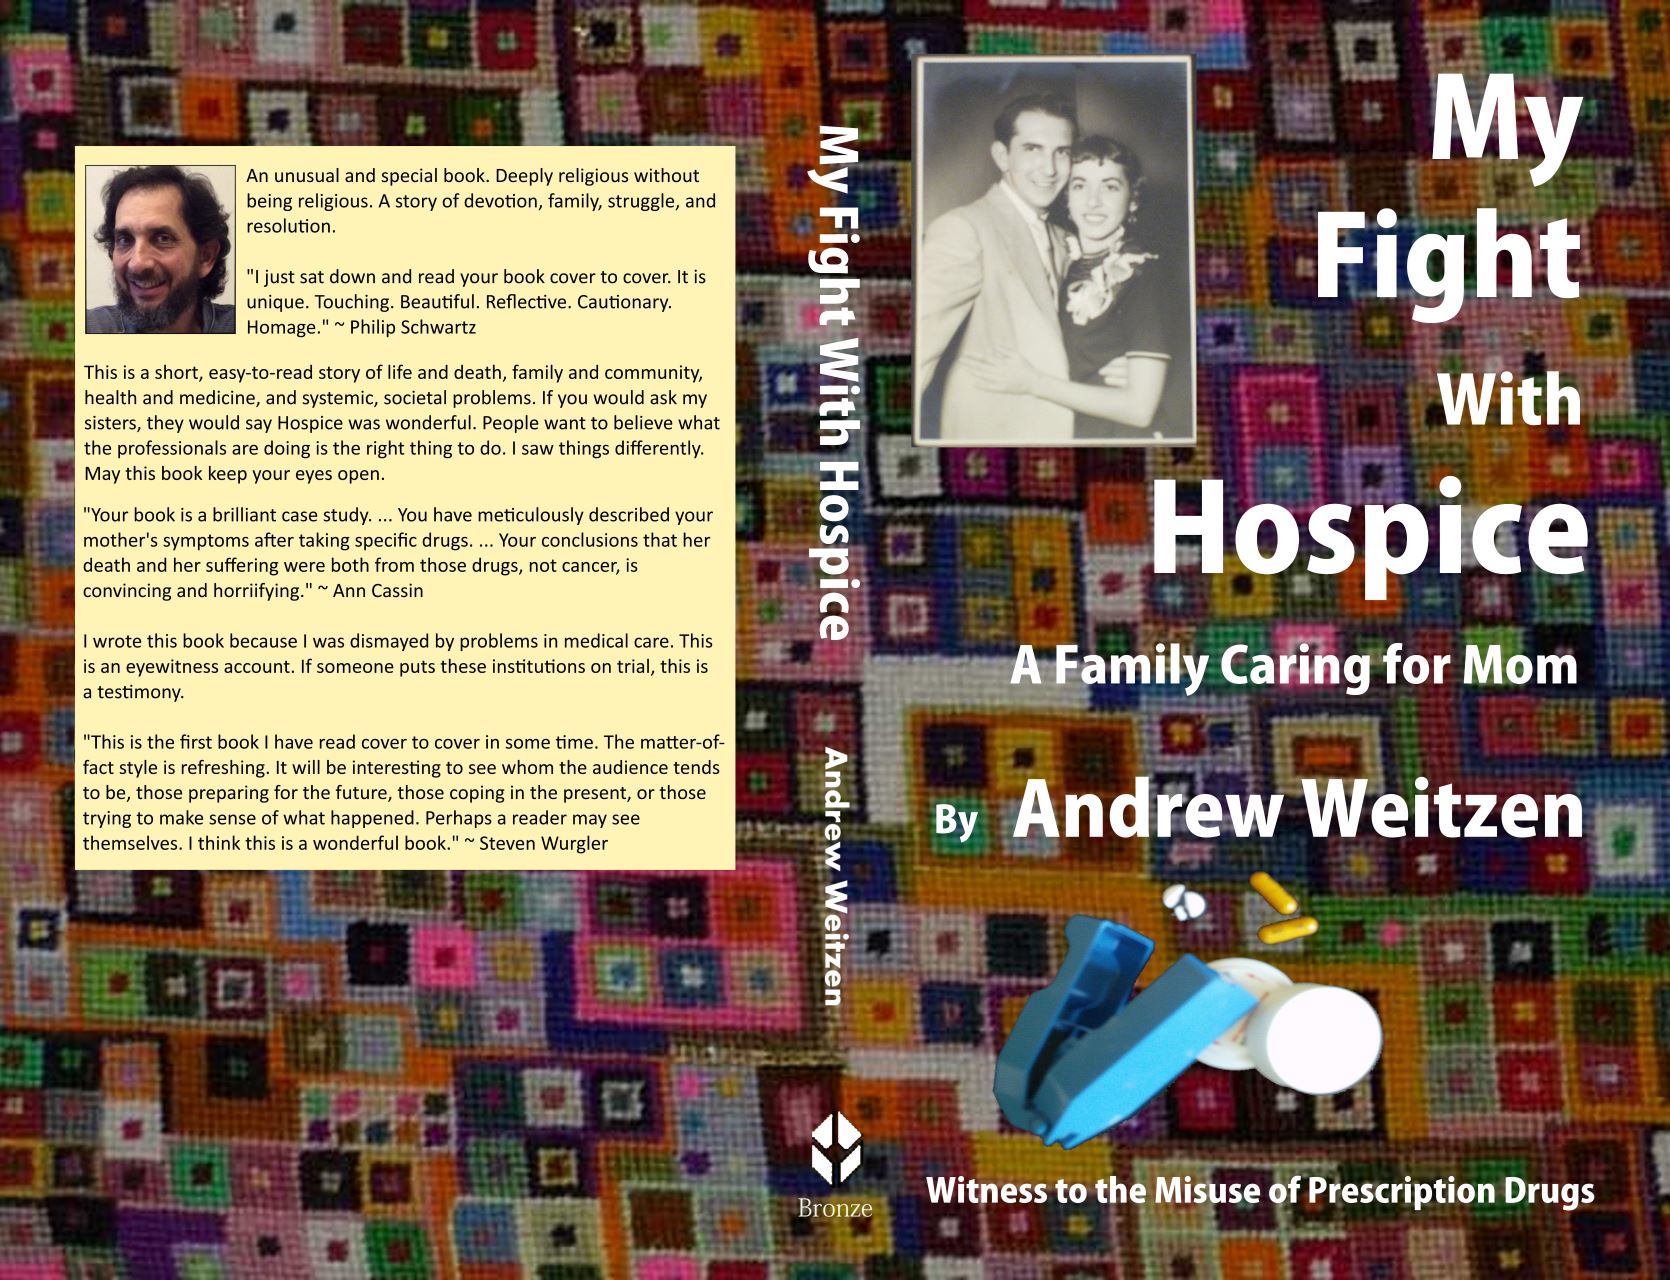 My Fight With Hospice cover by Edith Weitzen and Andrew Weitzen